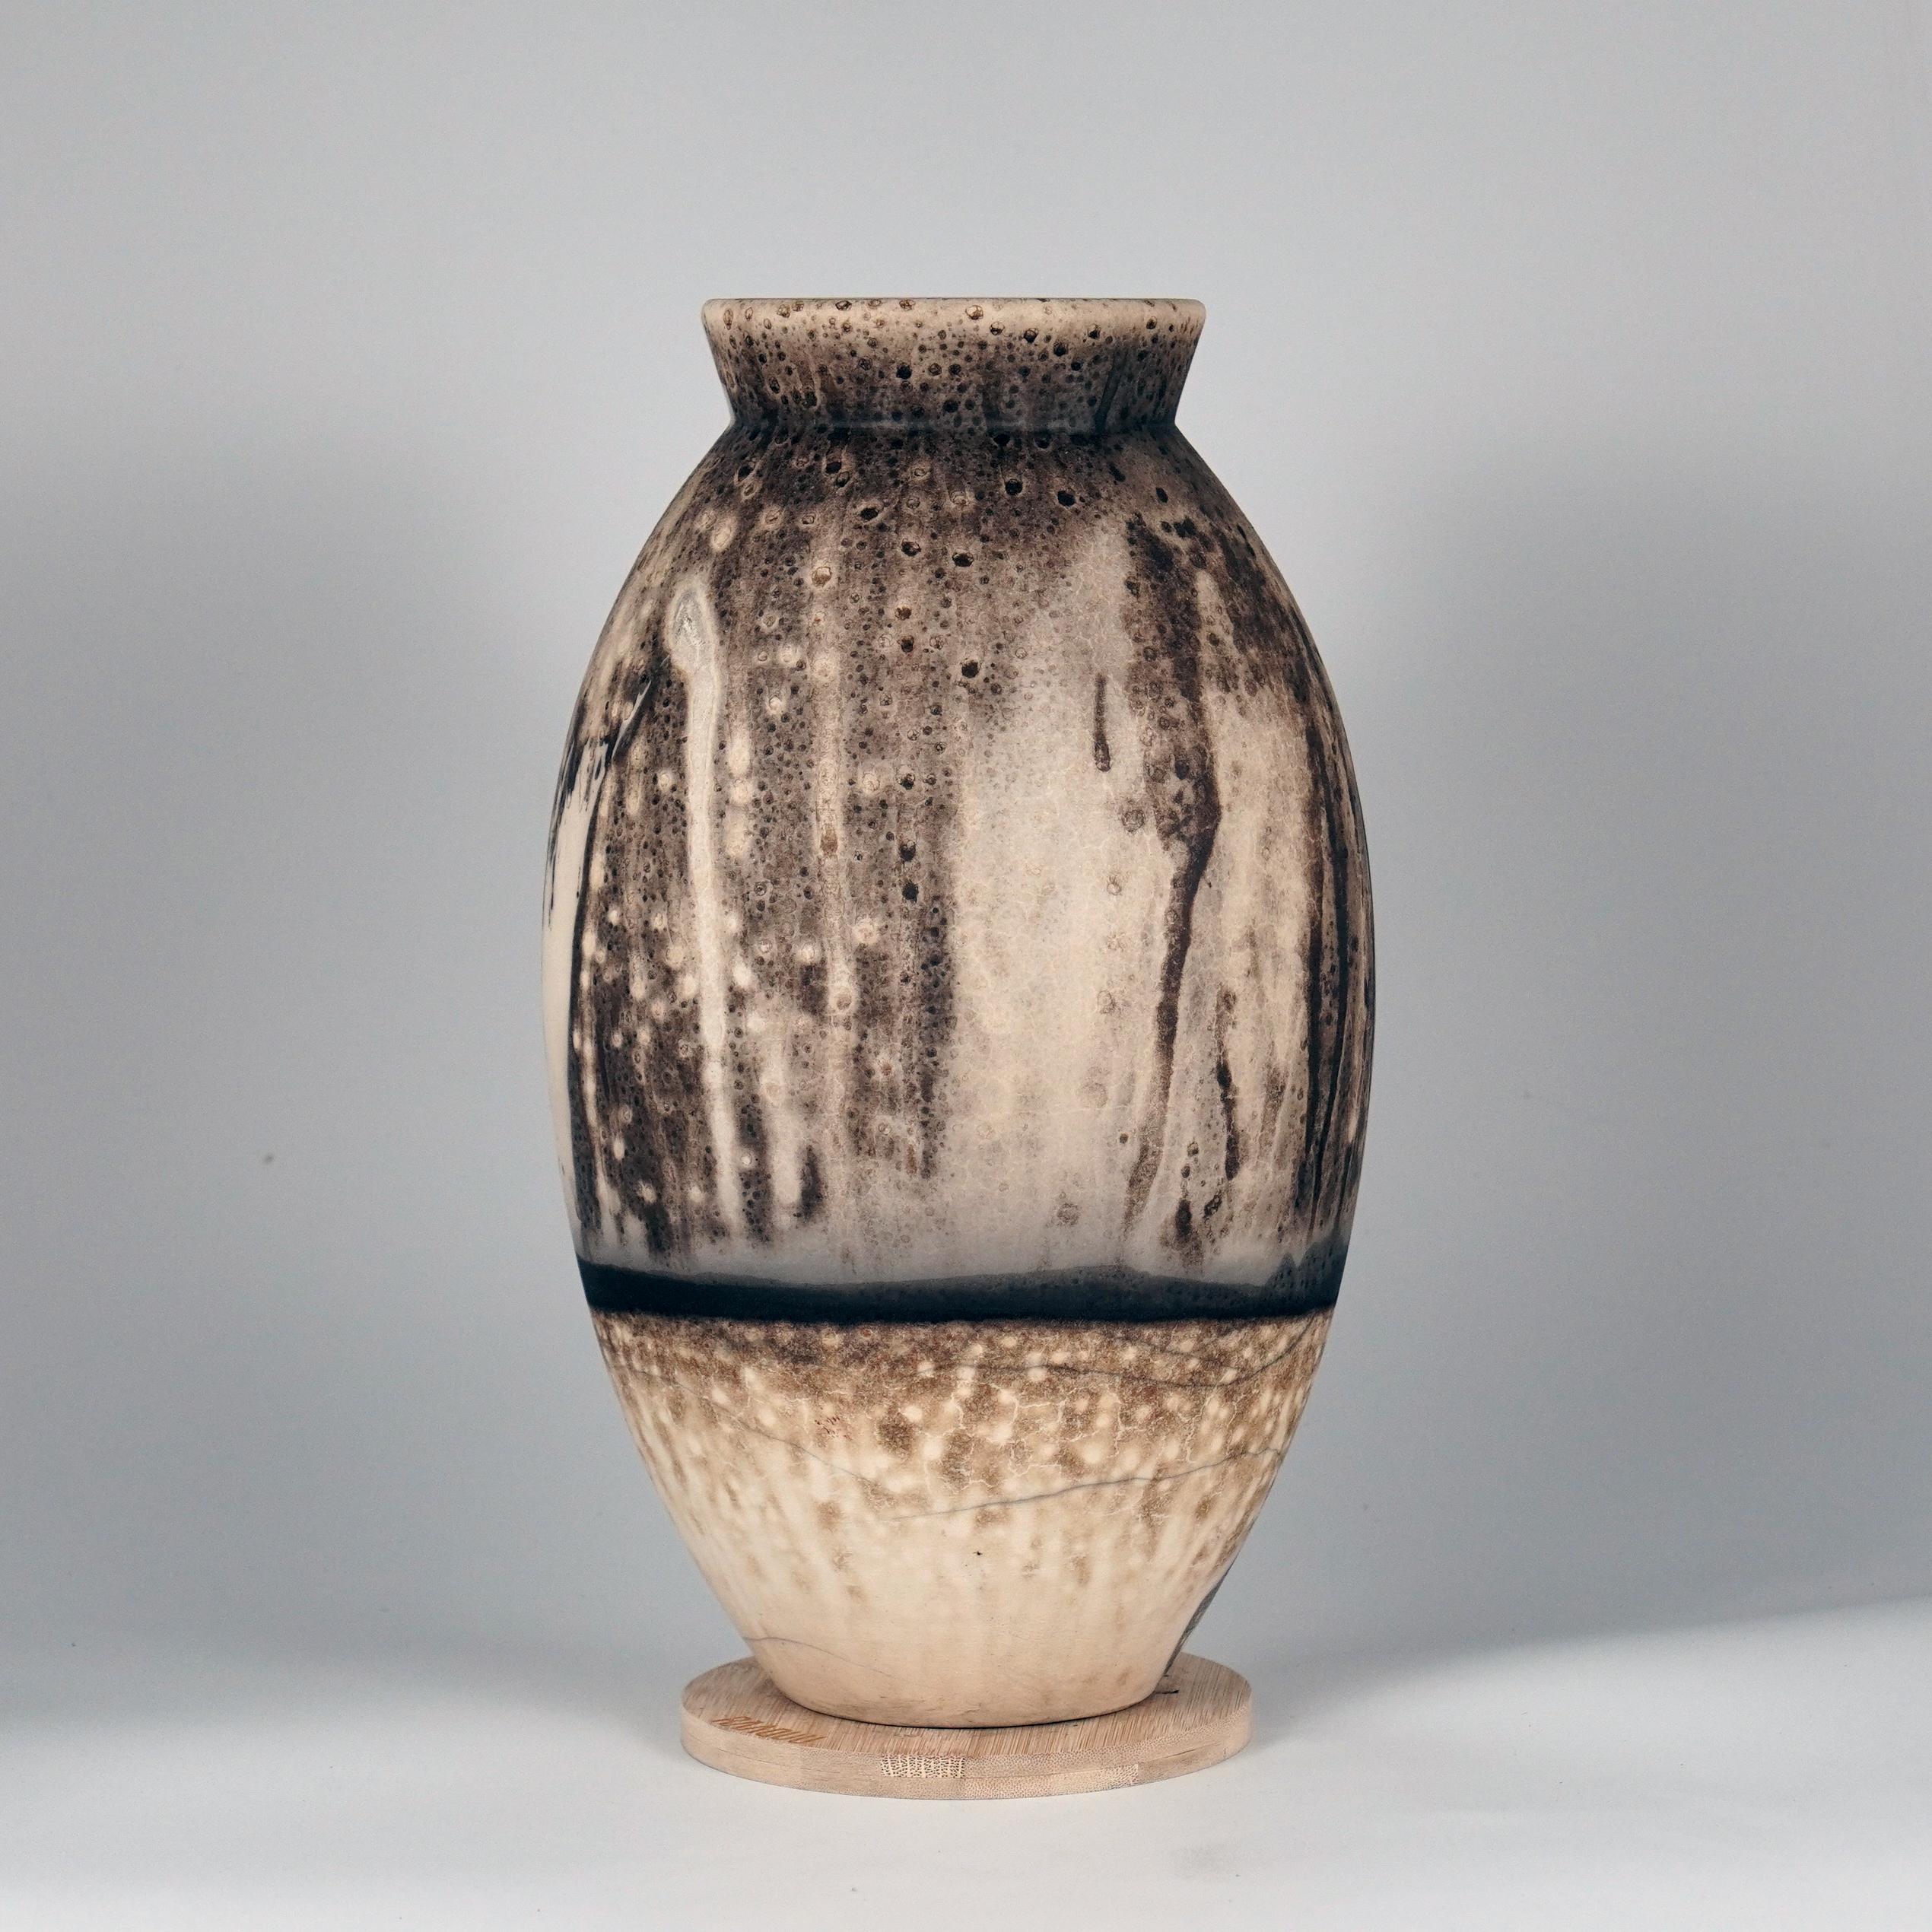 The Oval Vase is a tall, teardrop-shaped design best for adding a touch of elegance and intrigue to an interior space. Made using the Raku technique, it easily becomes a great conversation starter.

Obvara is a firing technique similar to the Raku